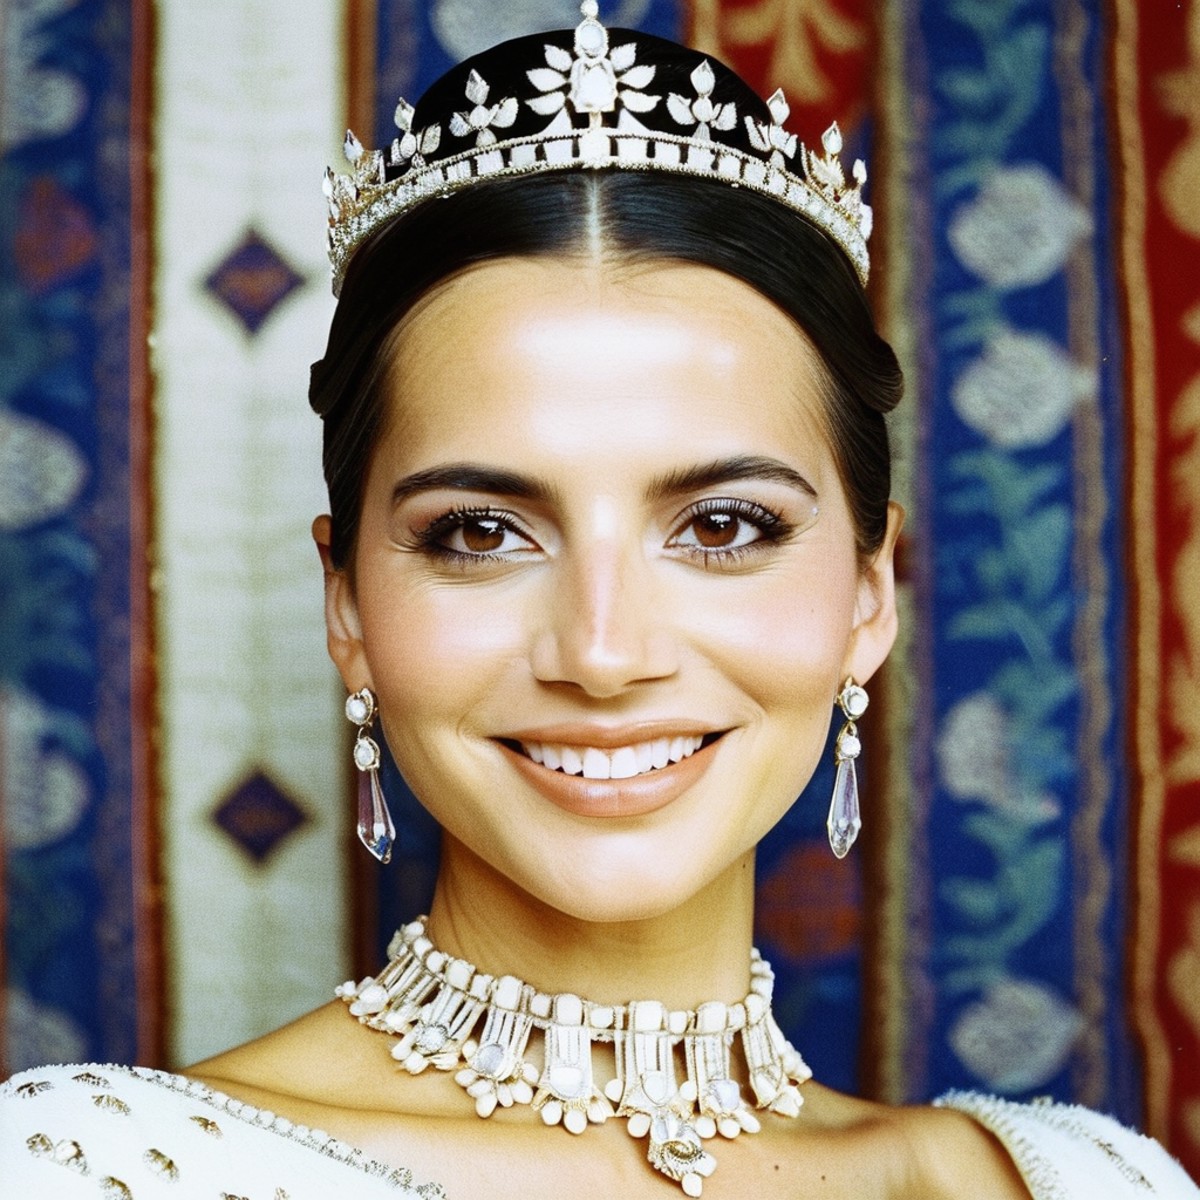 (Skin texture),High quality,Closeup face portrait photo, analog, film grain, actress dressed as a medieval queen with a de...